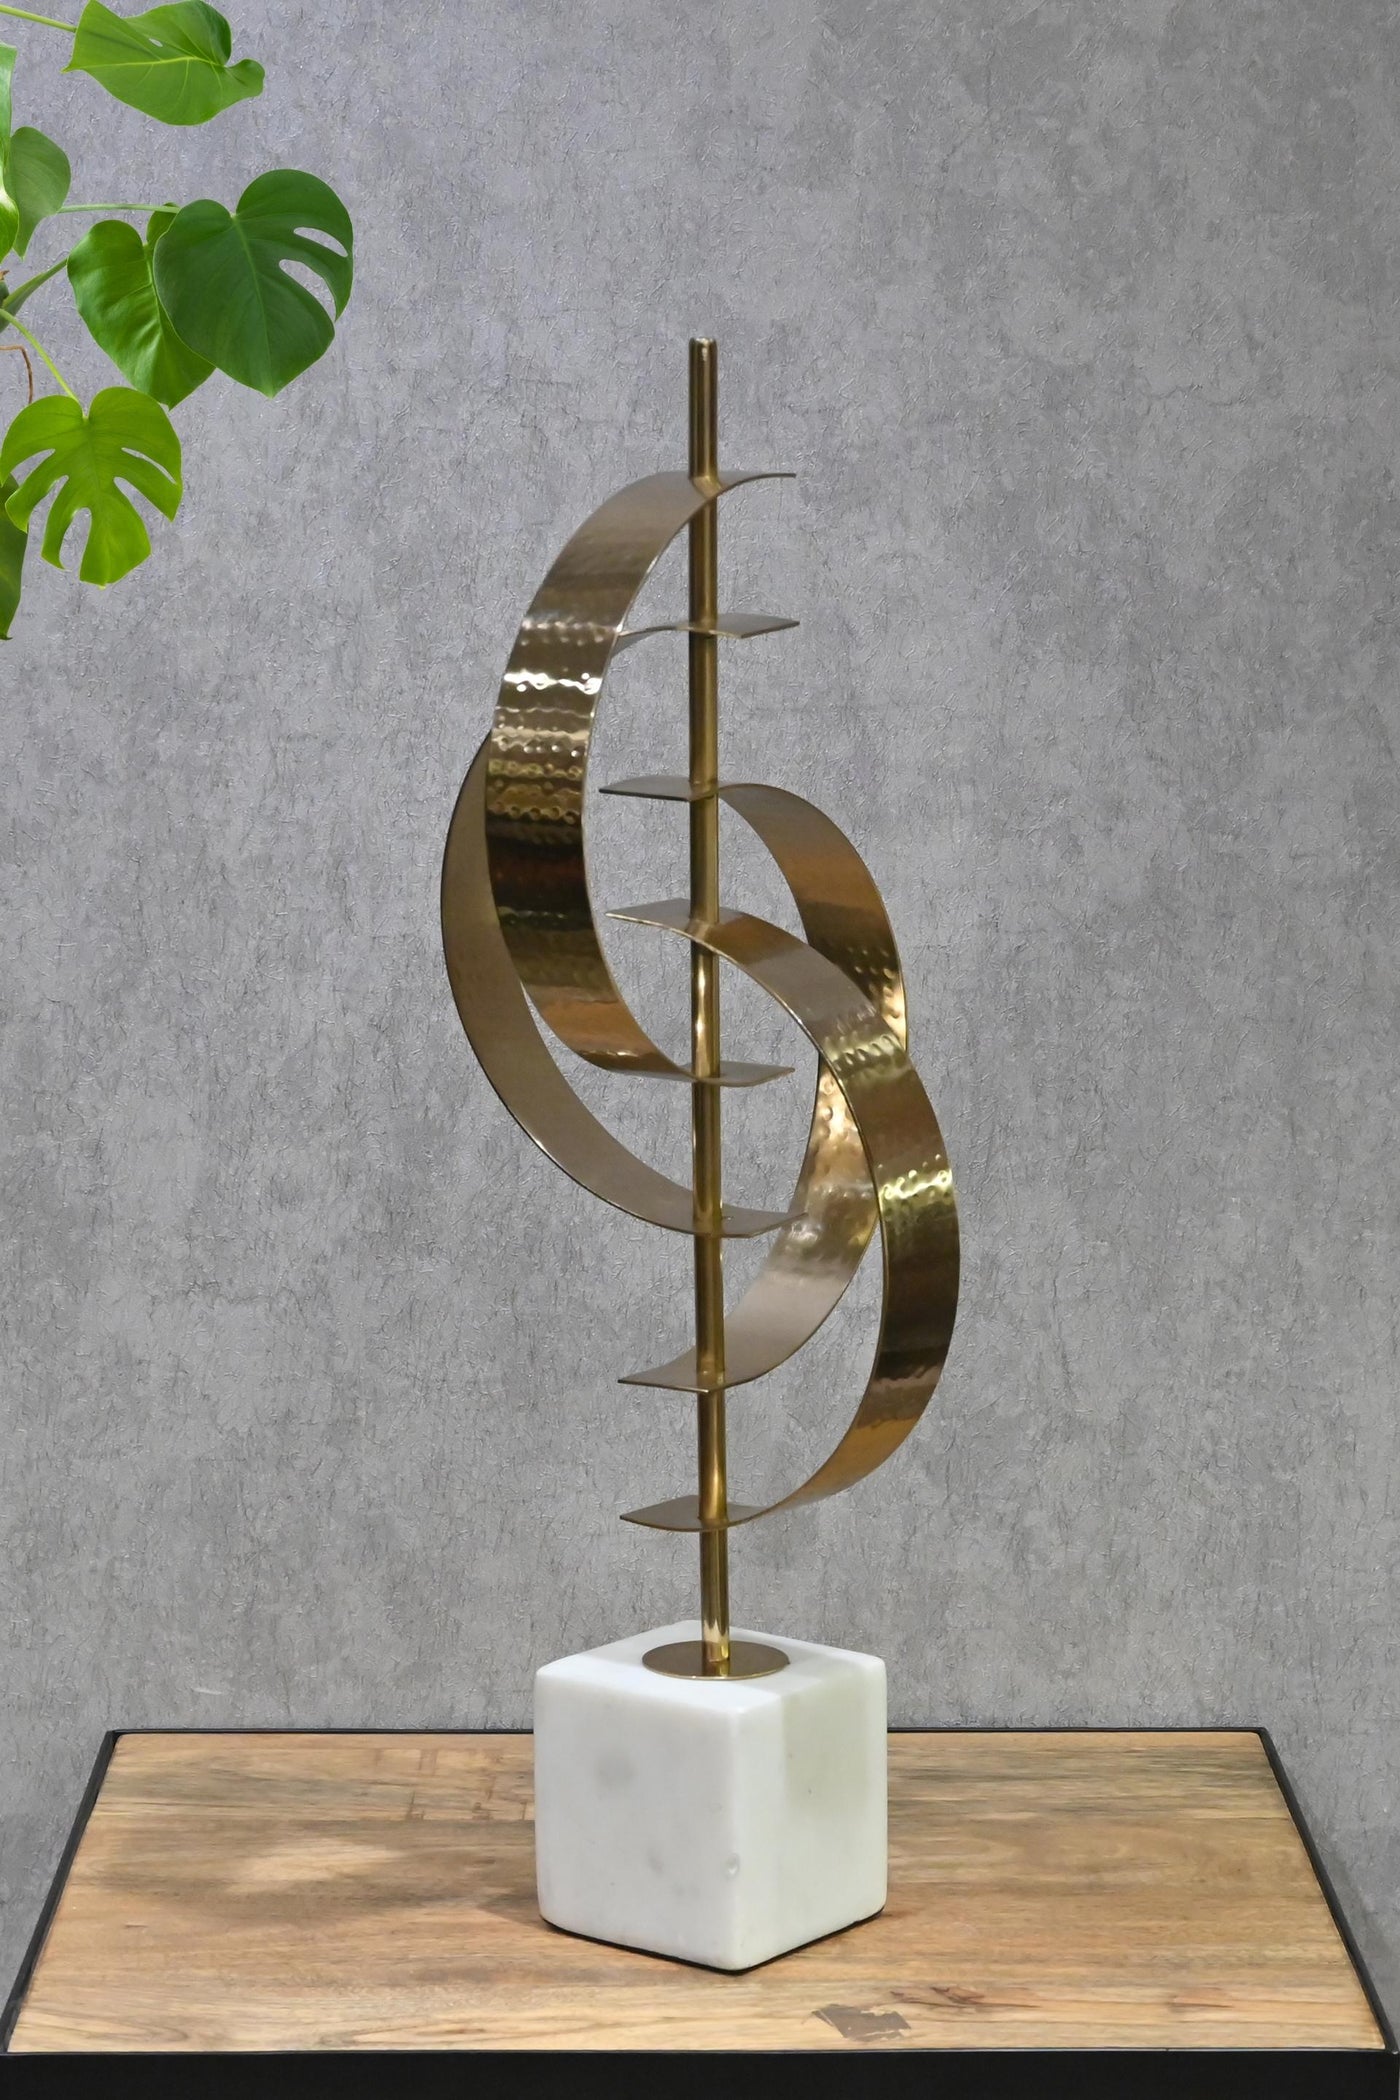 Pollination Modern Geometric Golden Metal Art Sculpture for your Home or Office Decor-Small